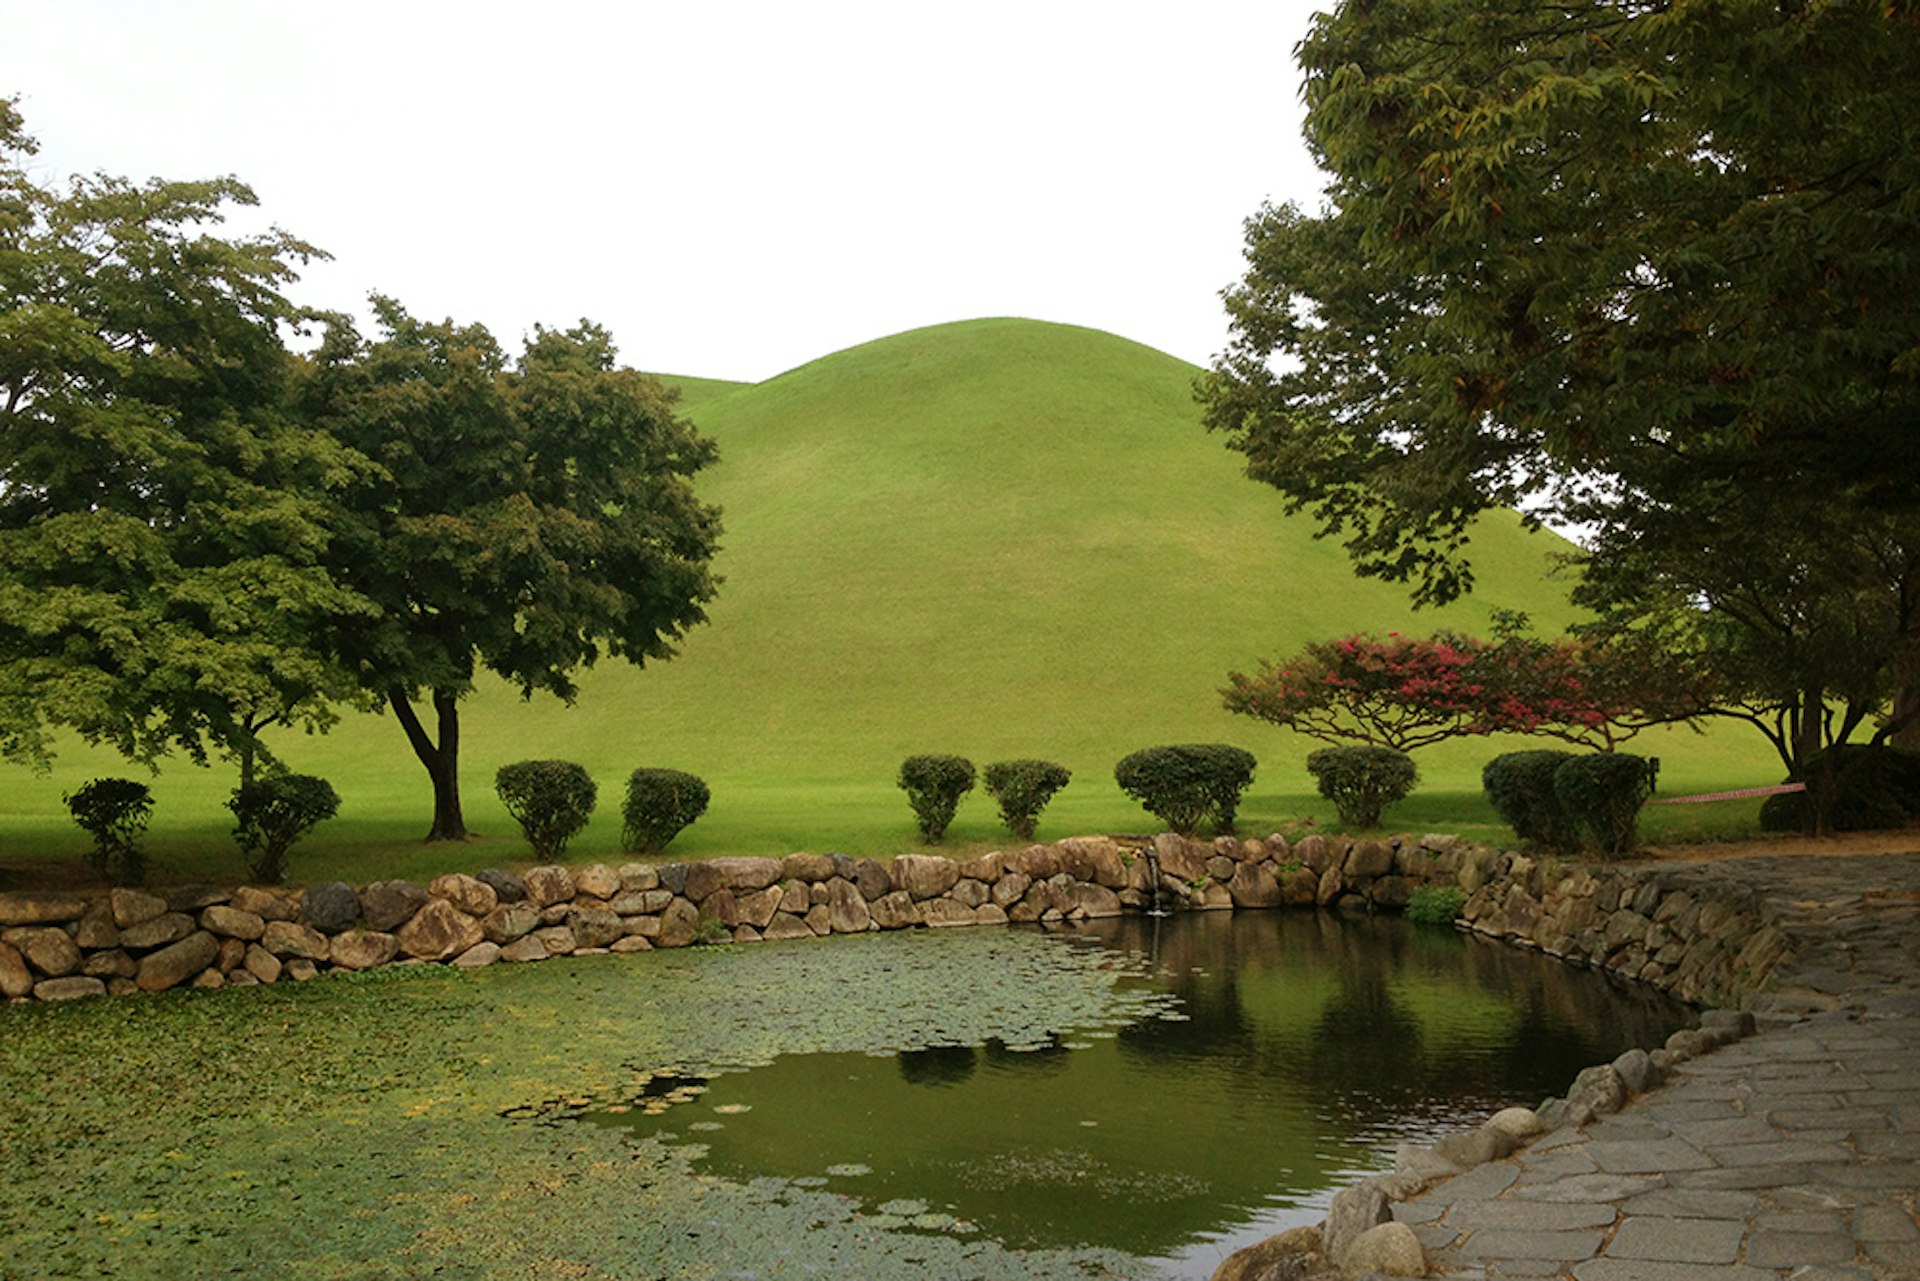 Burial mounds of Shilla rulers. Image by Louise Bastock / Lonely Planet